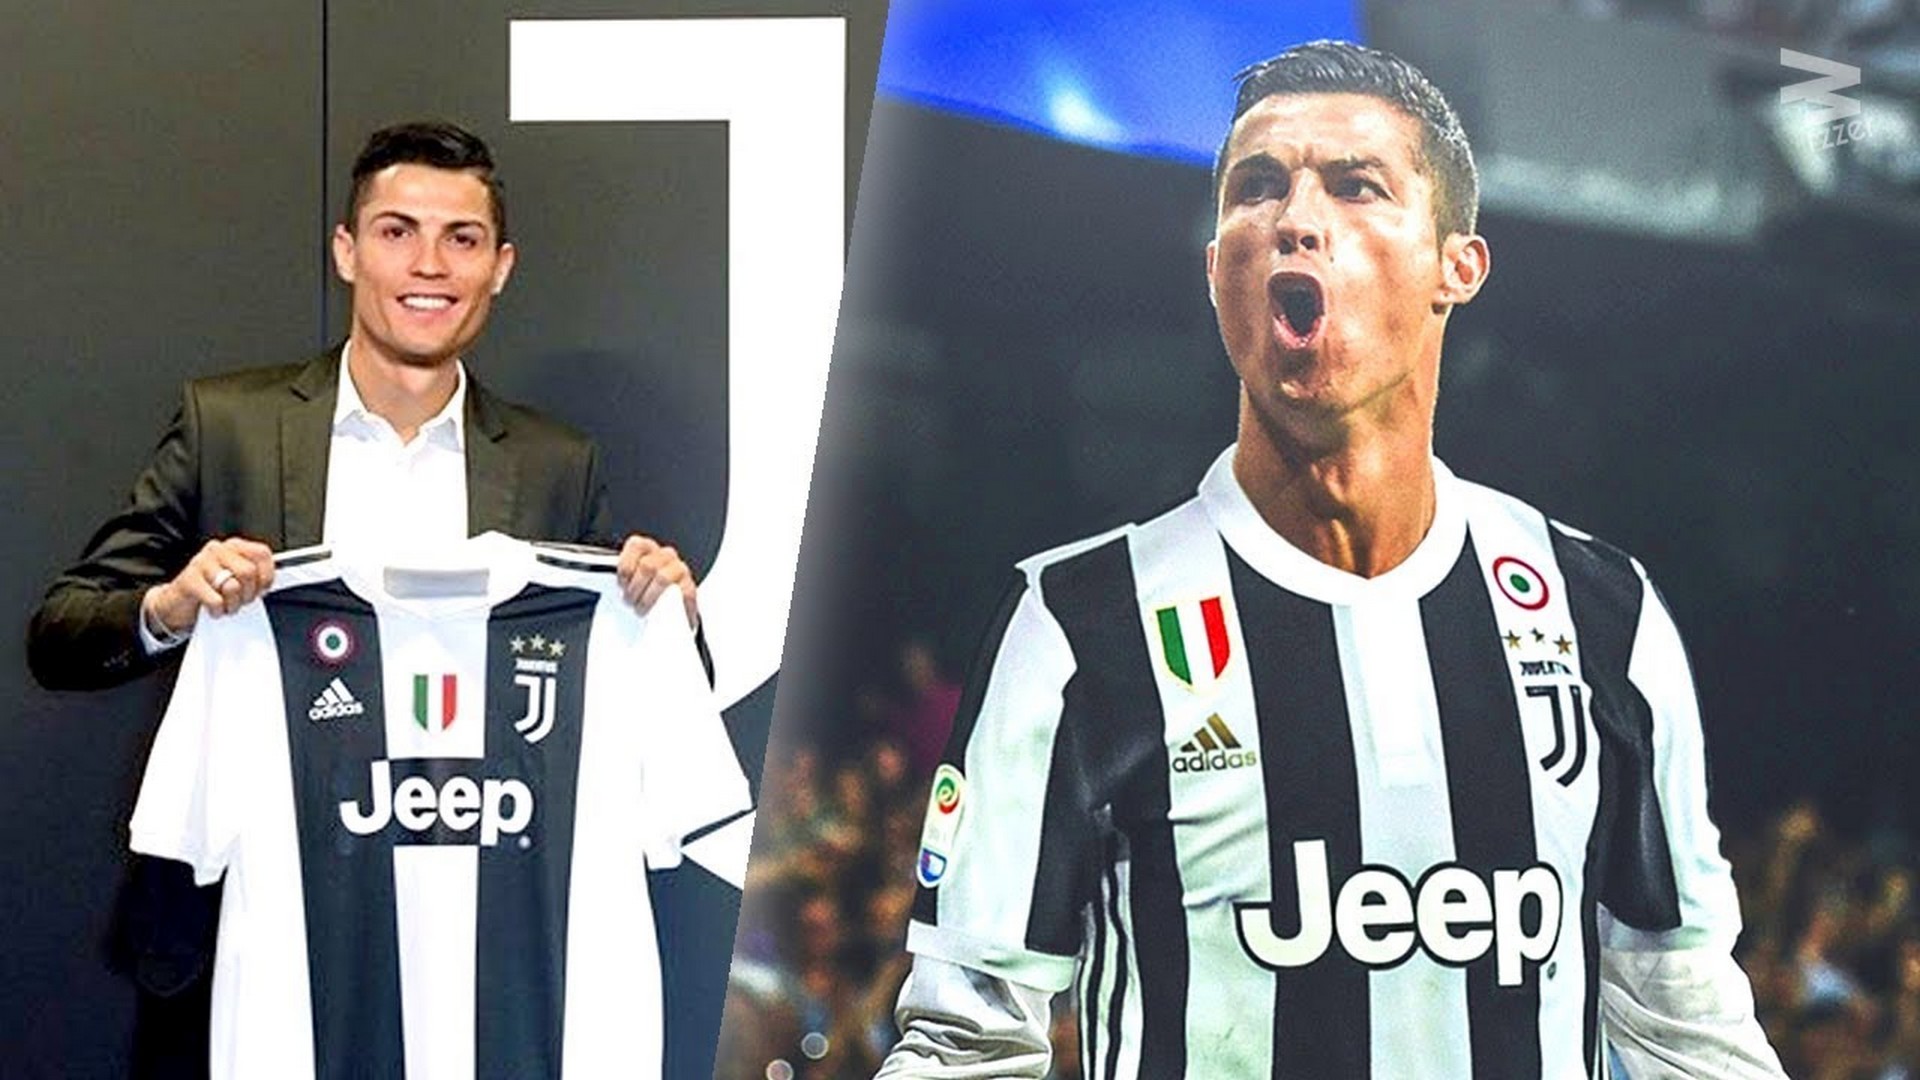 Wallpaper C Ronaldo Juventus HD with image resolution 1920x1080 pixel. You can make this wallpaper for your Desktop Computer Backgrounds, Mac Wallpapers, Android Lock screen or iPhone Screensavers